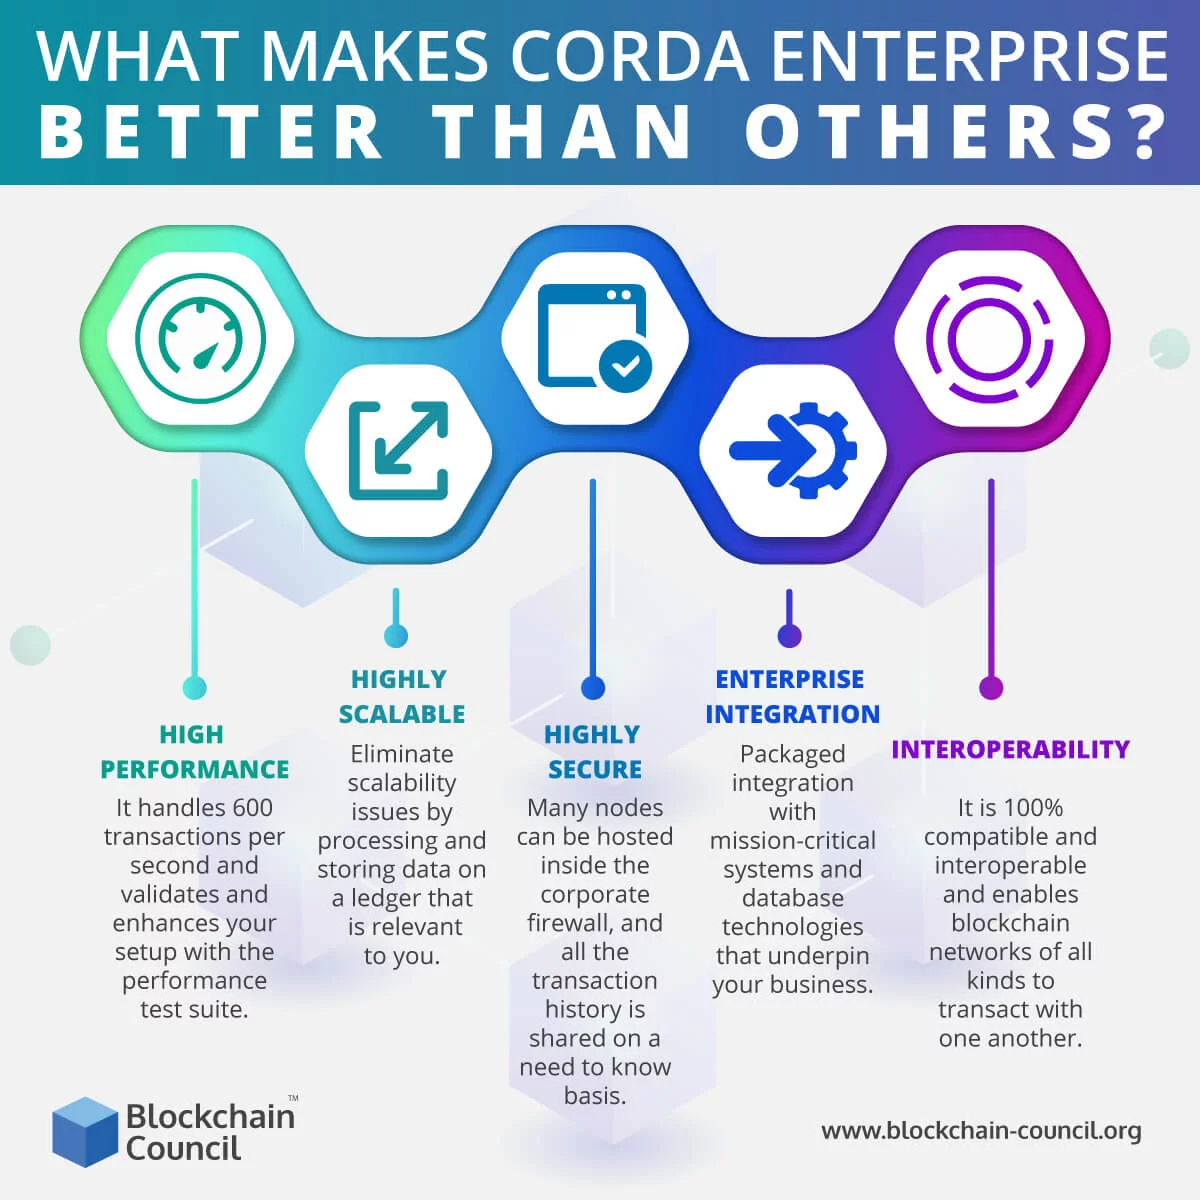 What Makes Corda Enterprise Better Than Others?